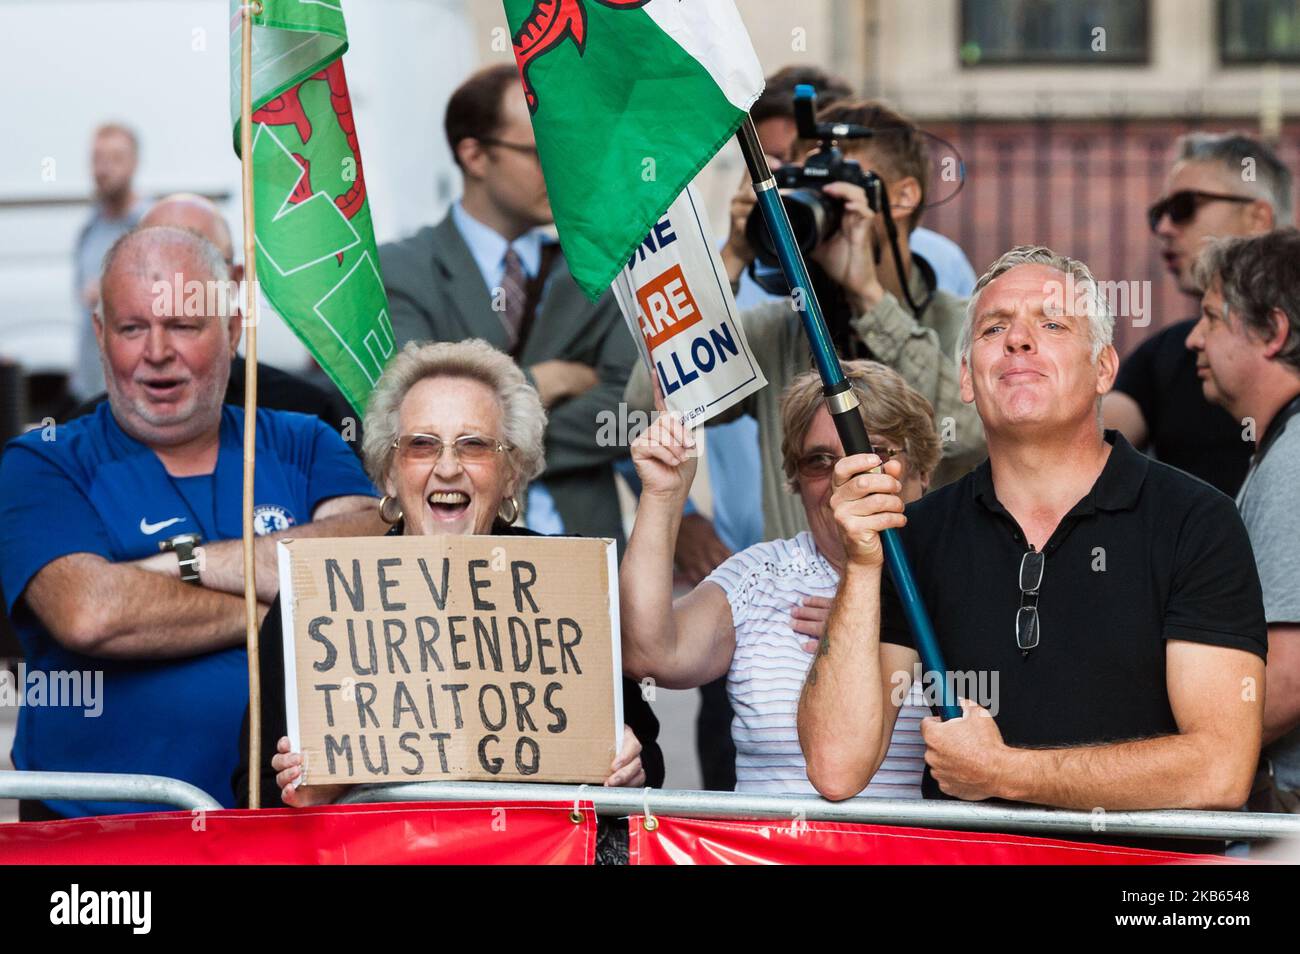 Pro-Brexit supporters of Boris Johnson protest outside the Supreme Court on 17 September, 2019 in London, England. Today, the Supreme Court judges begin a three-day hearing over the claim that Prime Minister Boris Johnson acted unlawfully in advising the Queen to prorogue parliament for five weeks in order to prevent MPs from debating the Brexit crisis. (Photo by WIktor Szymanowicz/NurPhoto) Stock Photo